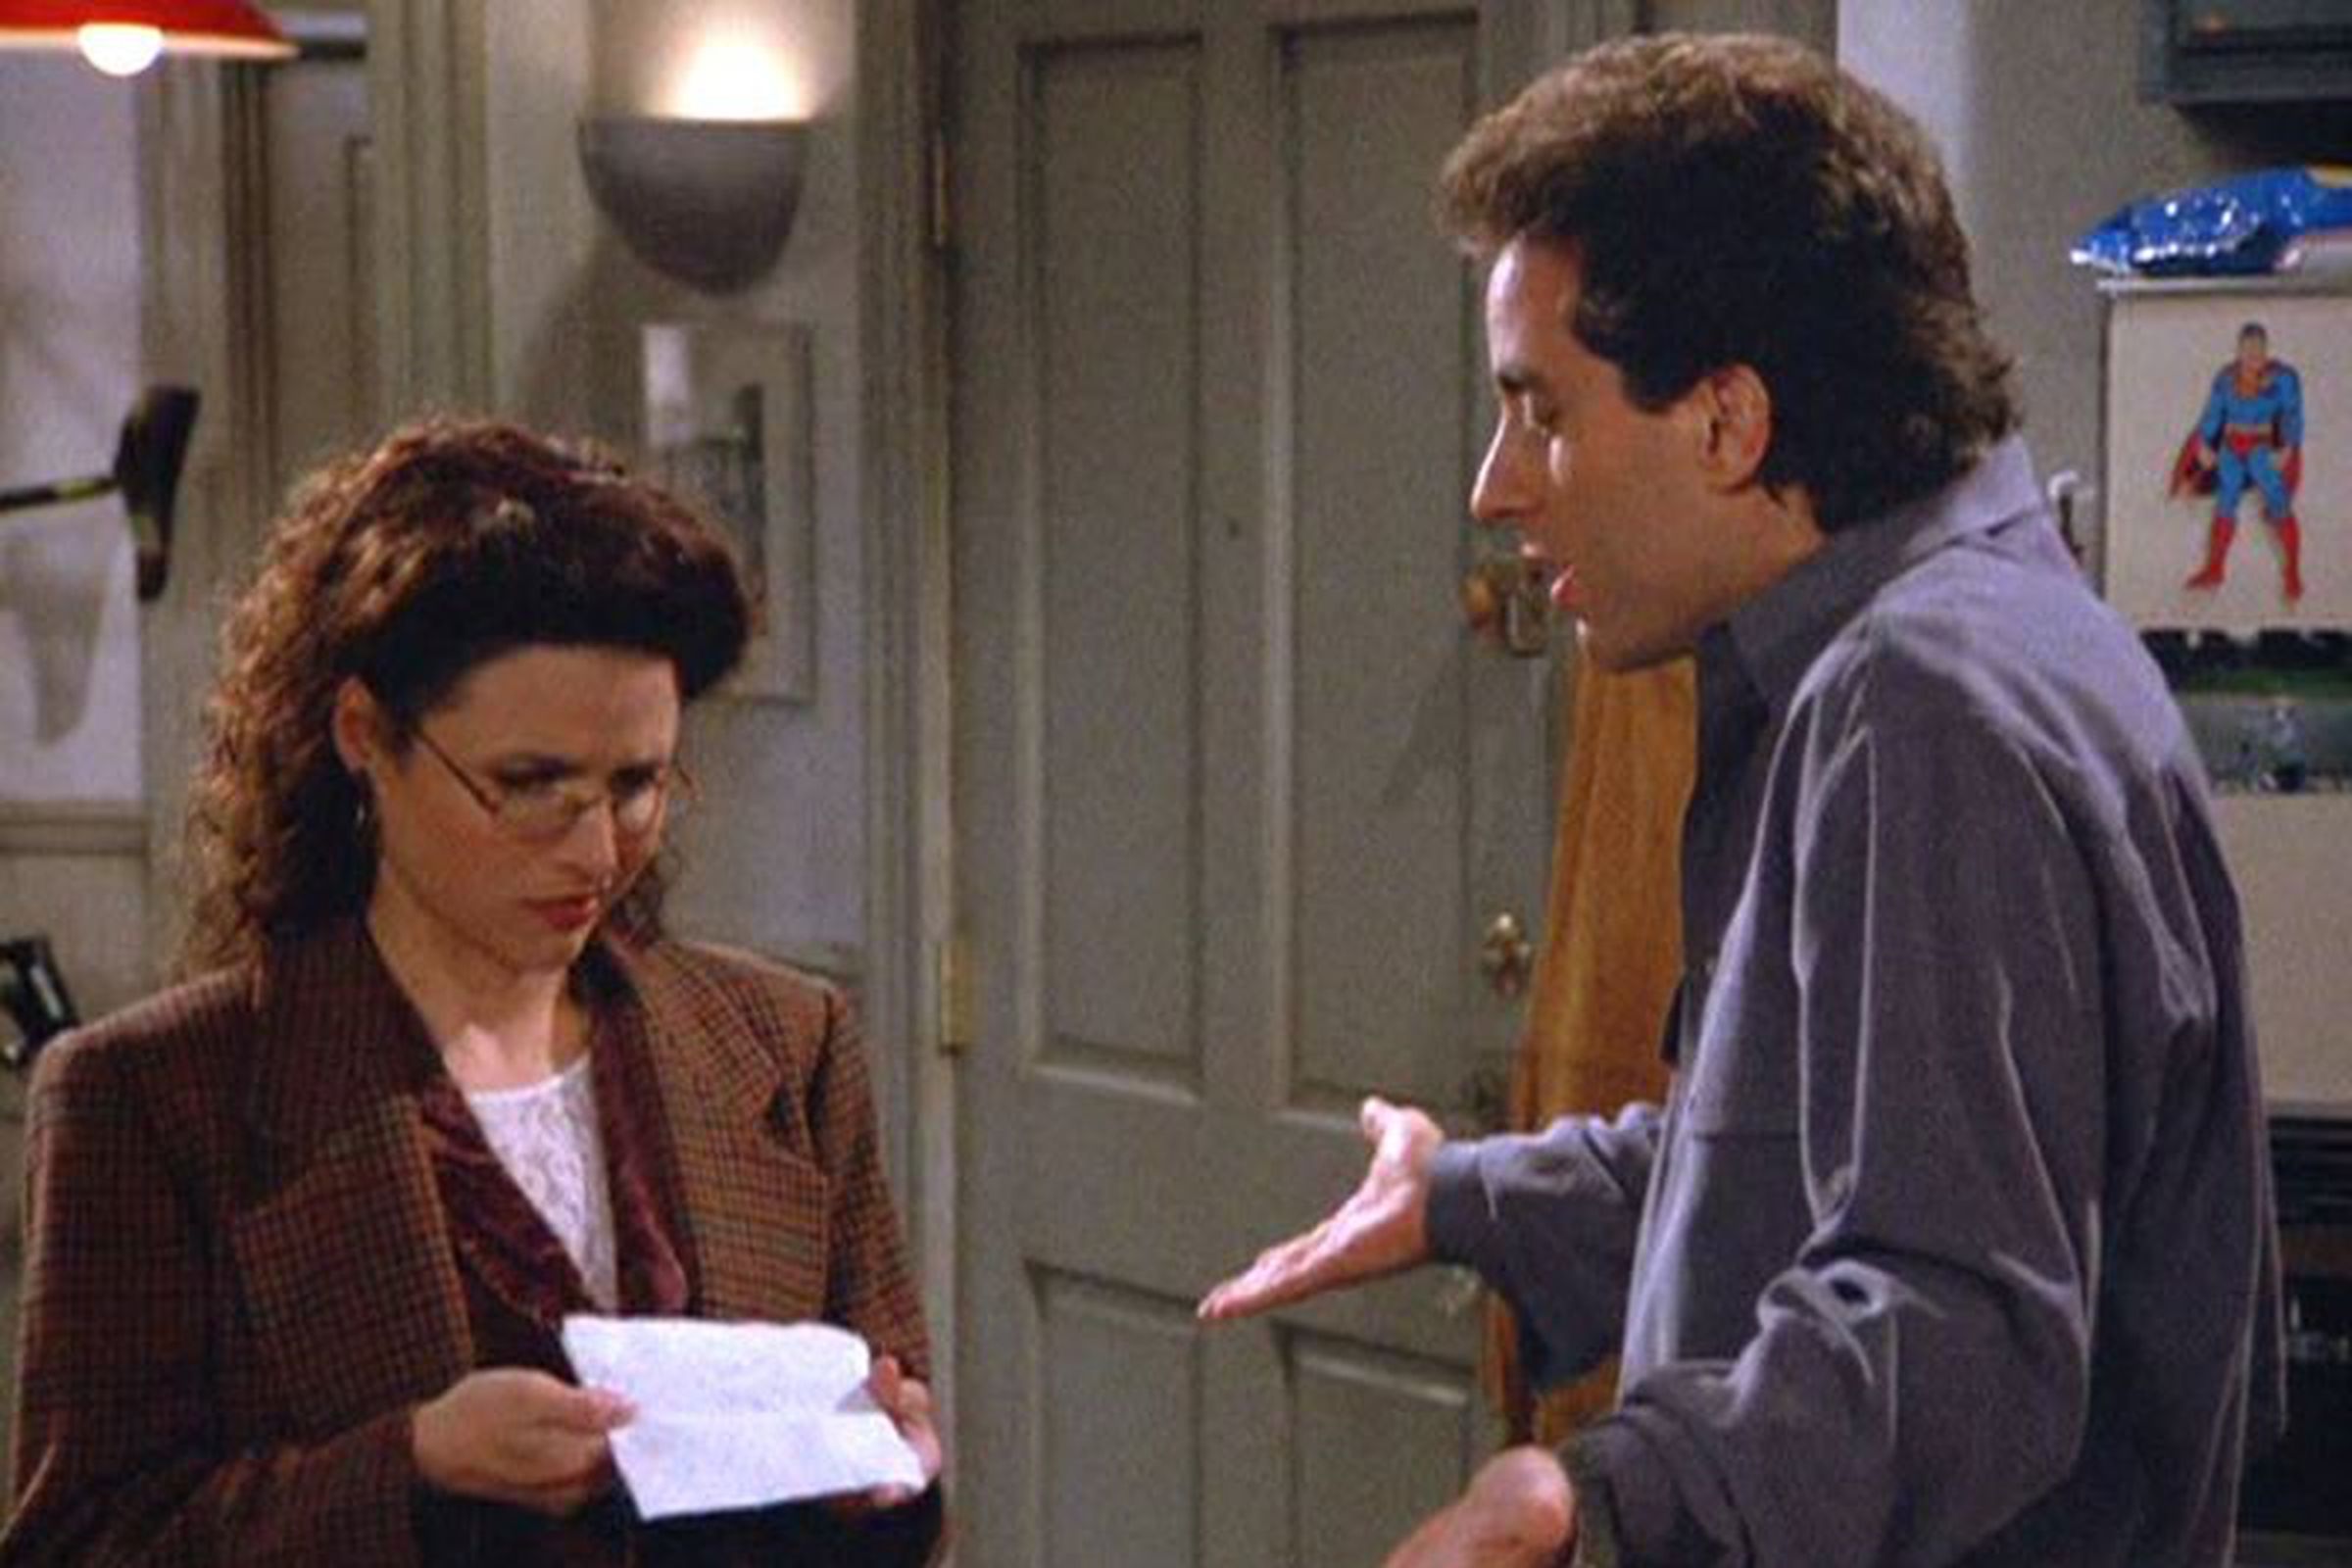 Seinfeld screengrab (Credit: Seinfeld/Sony Pictures/Facebook)